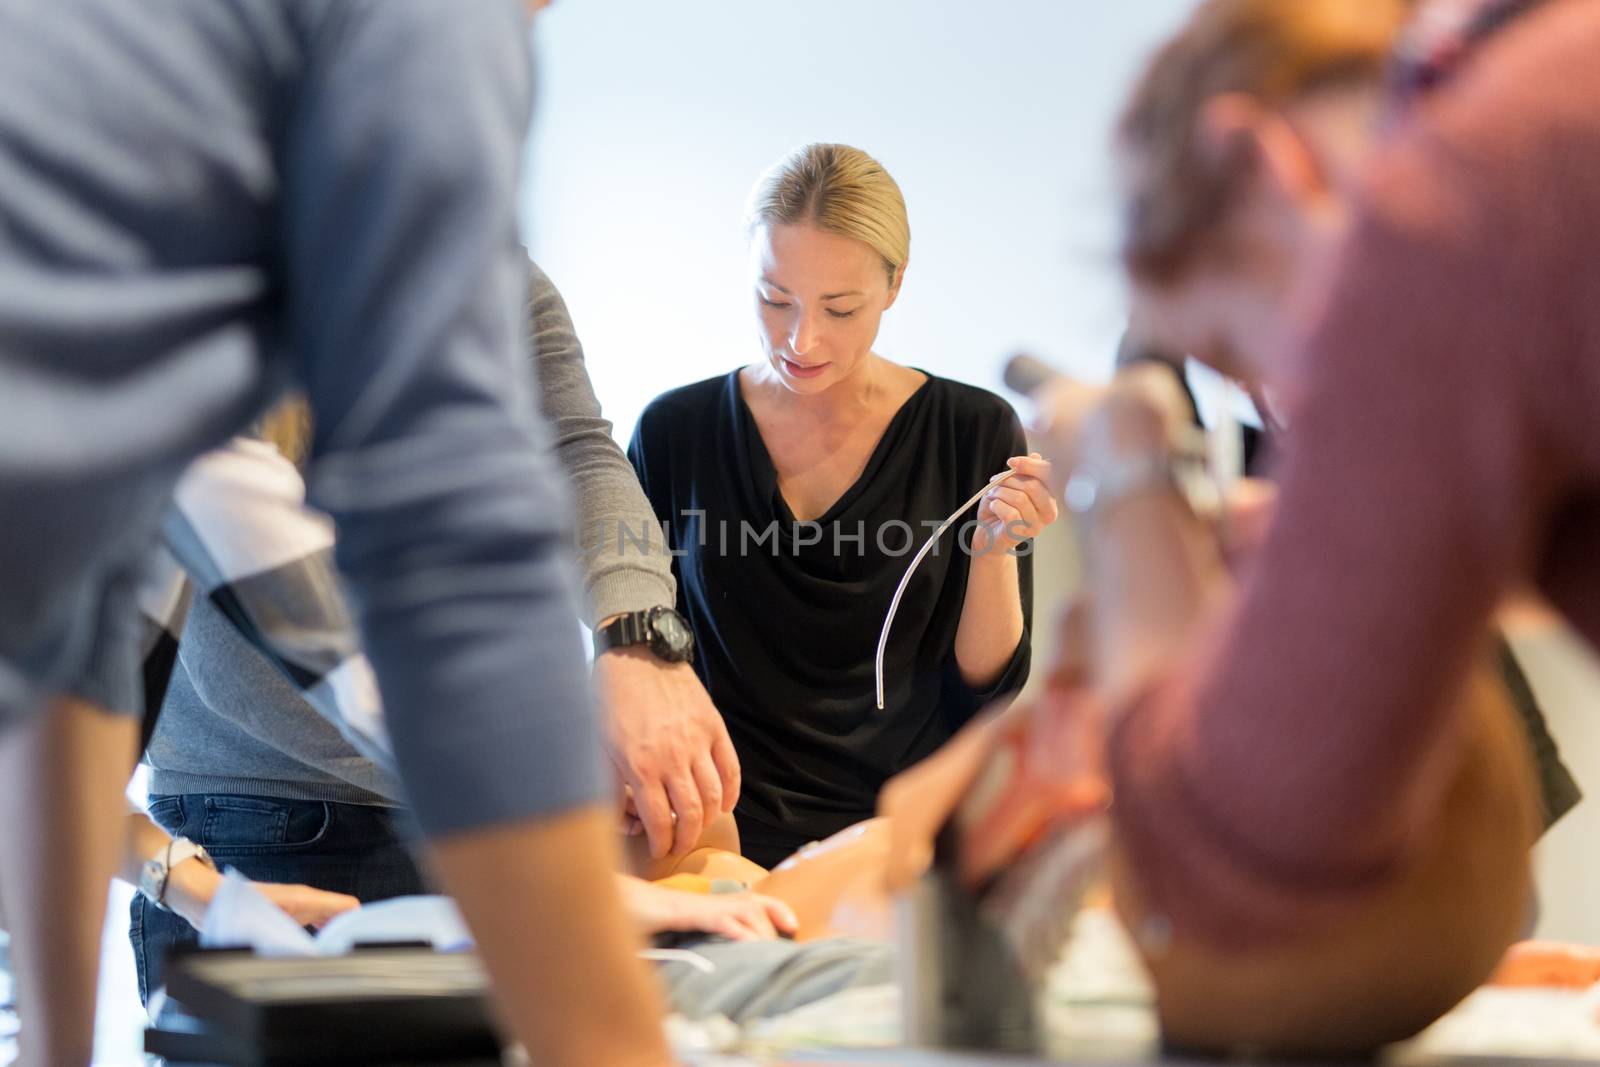 Medical doctor specialist expert displaying method of patient intubation on hands on medical education training and workshop. Participants learning new medical procedures and techniques. by kasto